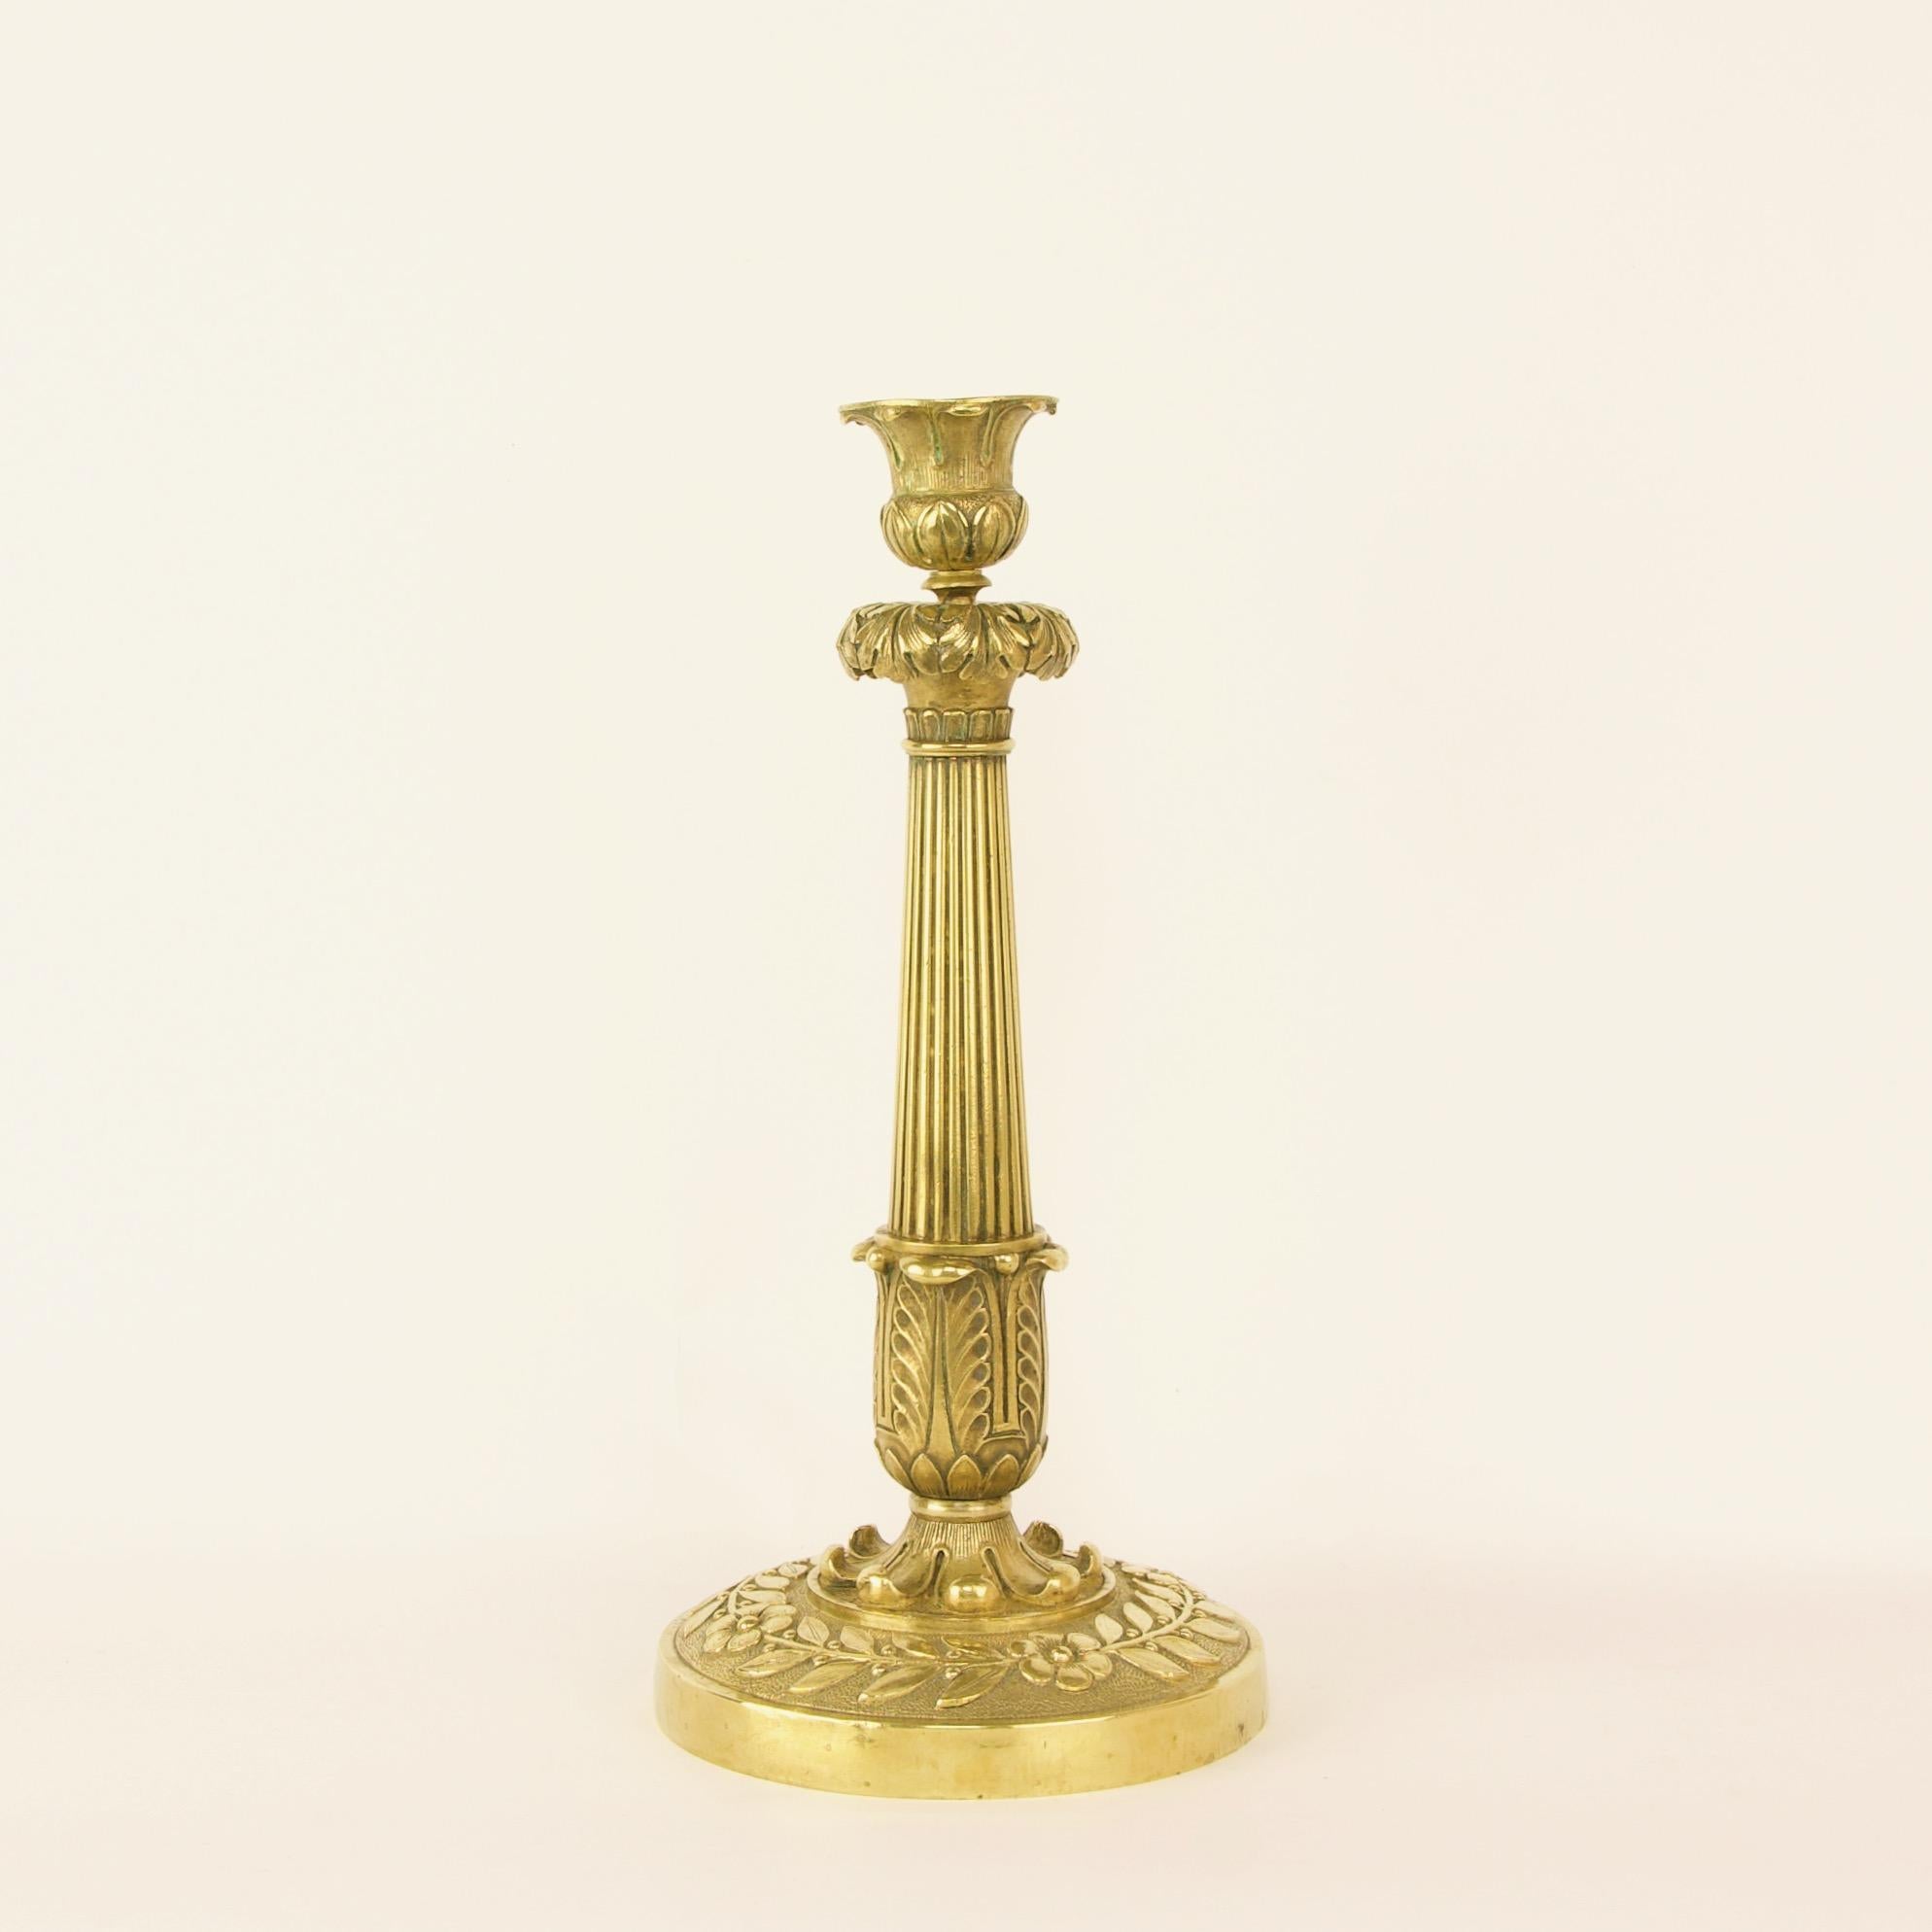 Pair of French Early 19th Century Empire Gilt-Bronze Candlesticks, circa 1820 For Sale 1